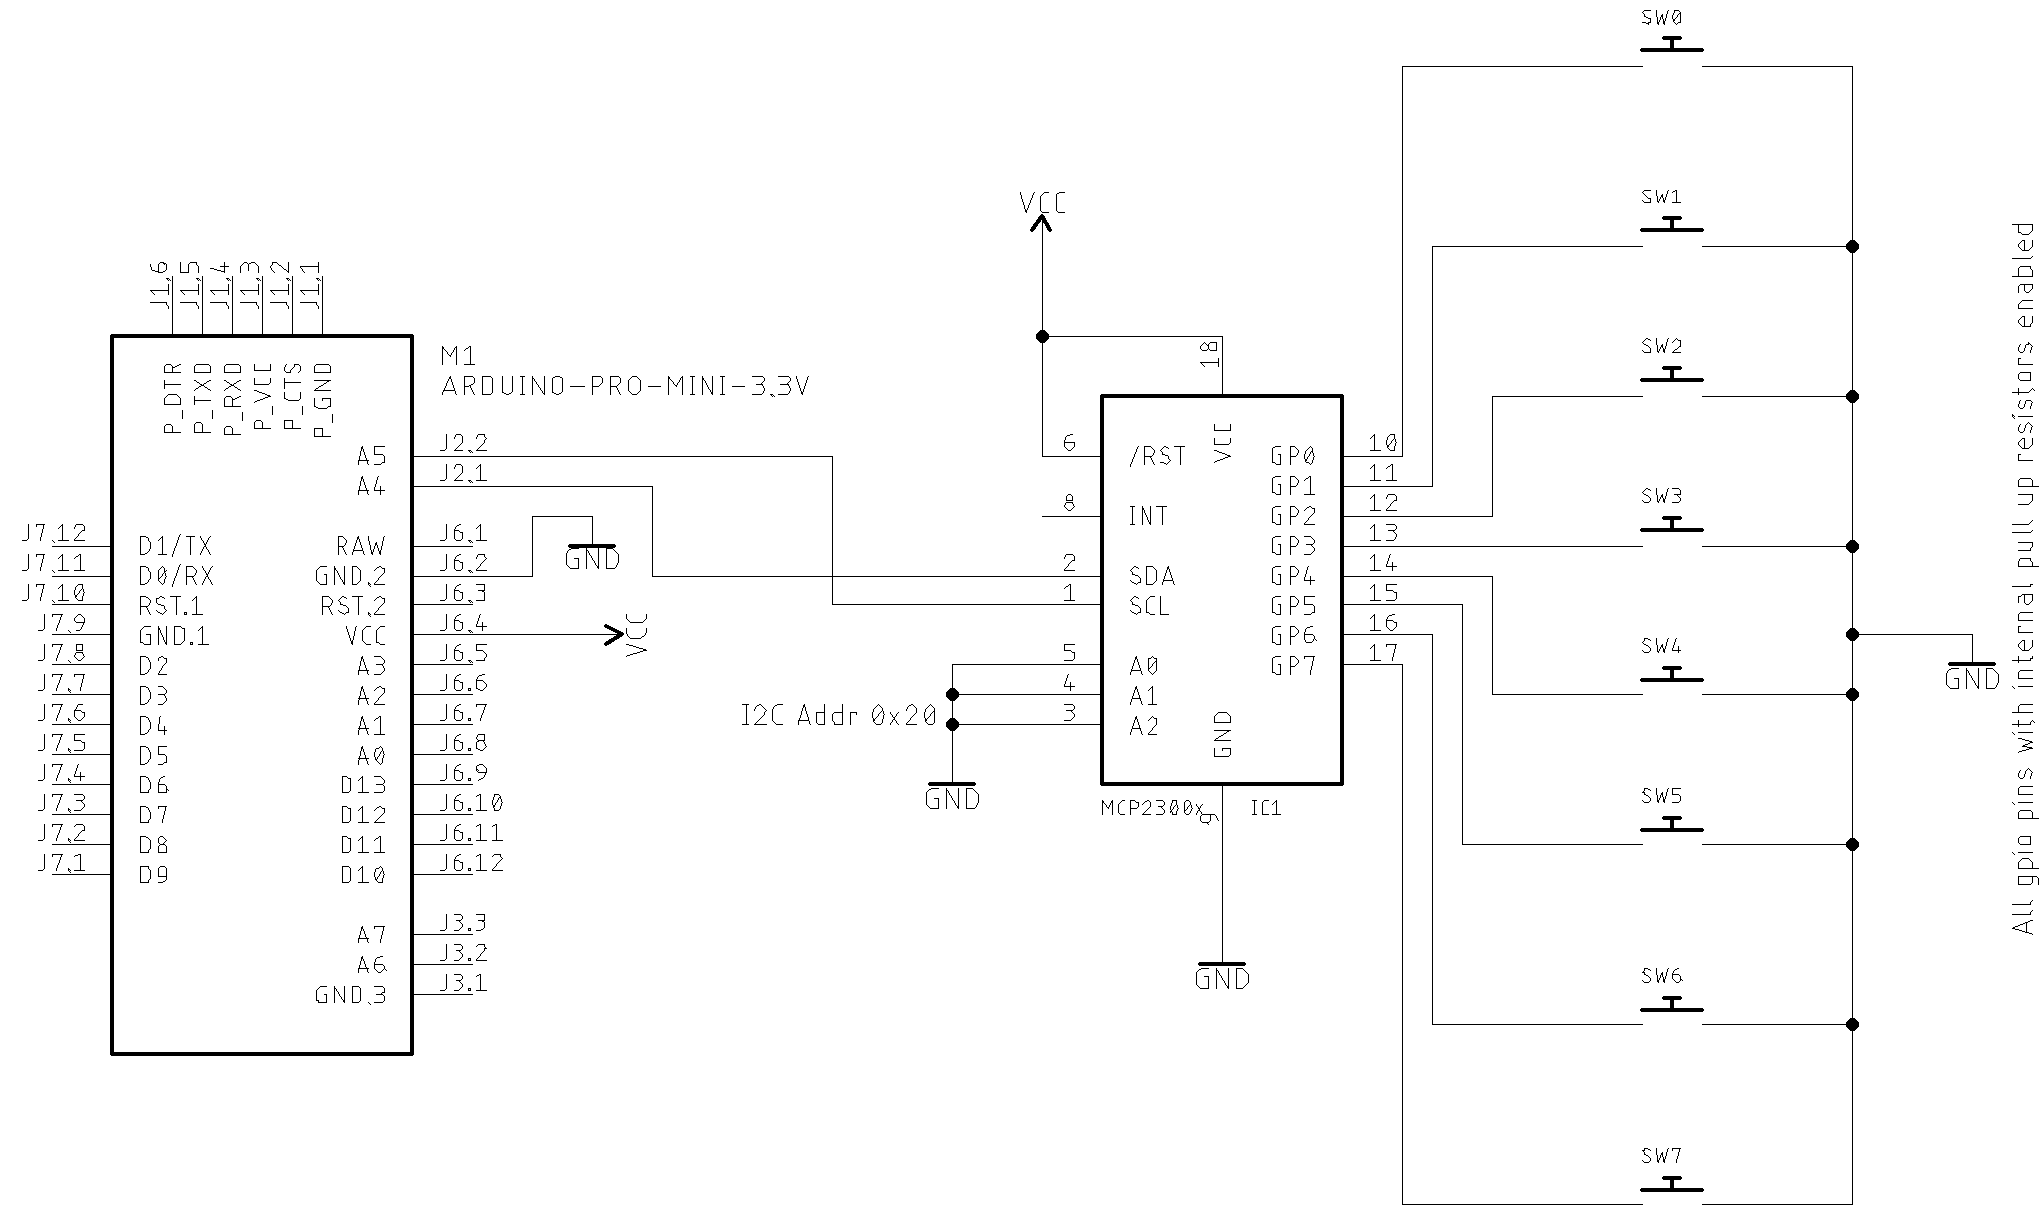 Basic Schematic with LEDs